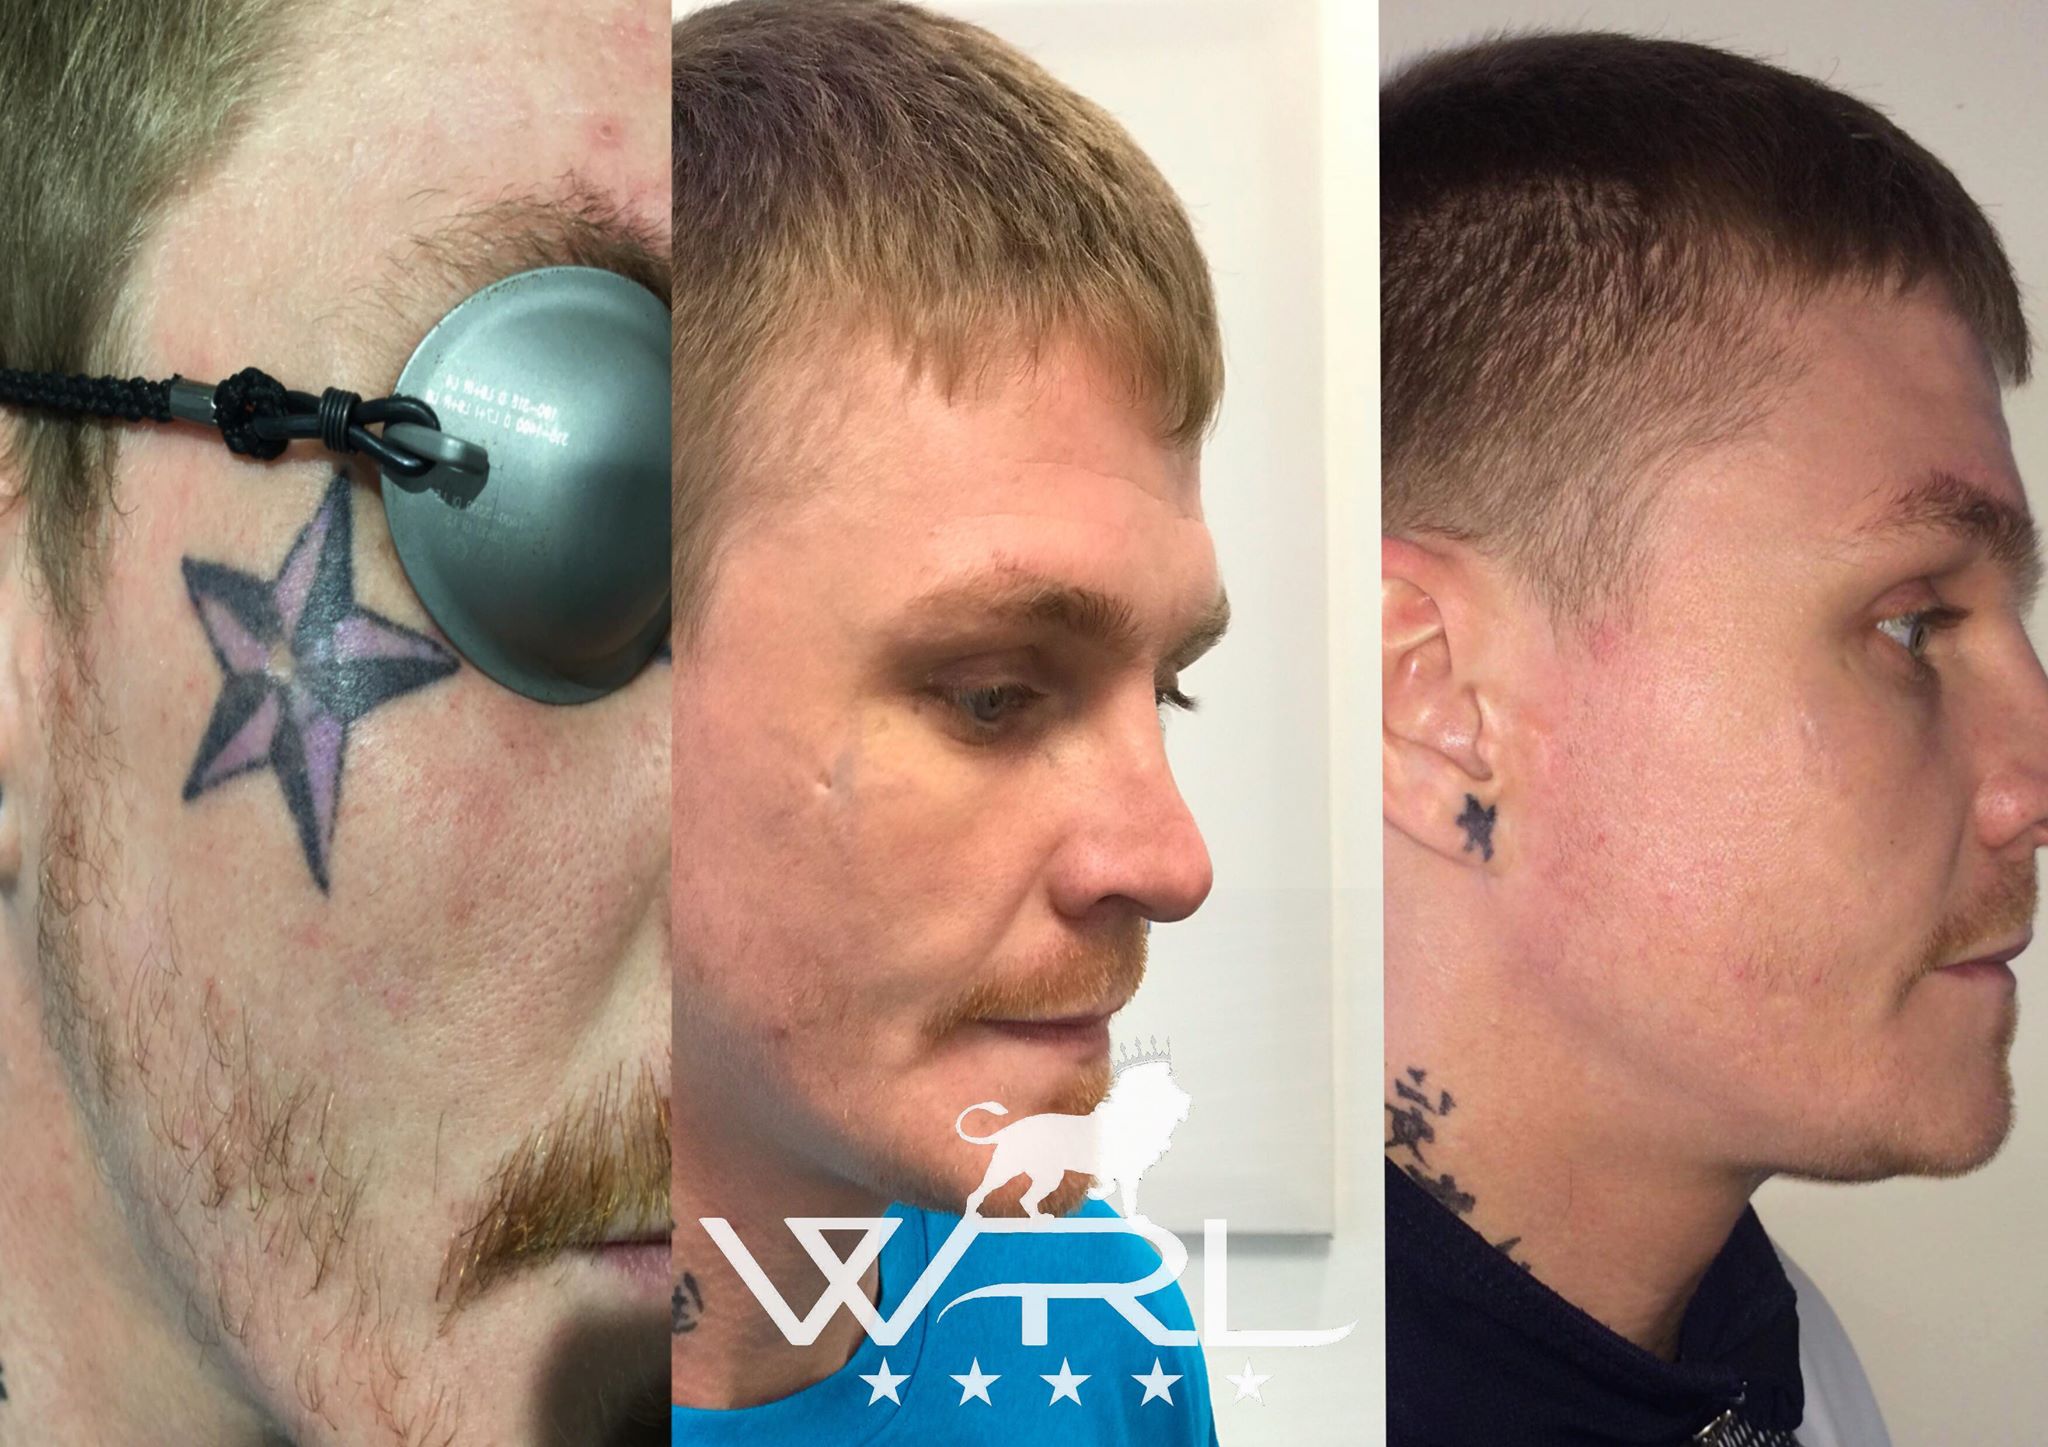 Laser Tattoo Removal Before and After in Plymouth - Whiteroom Laser Ltd